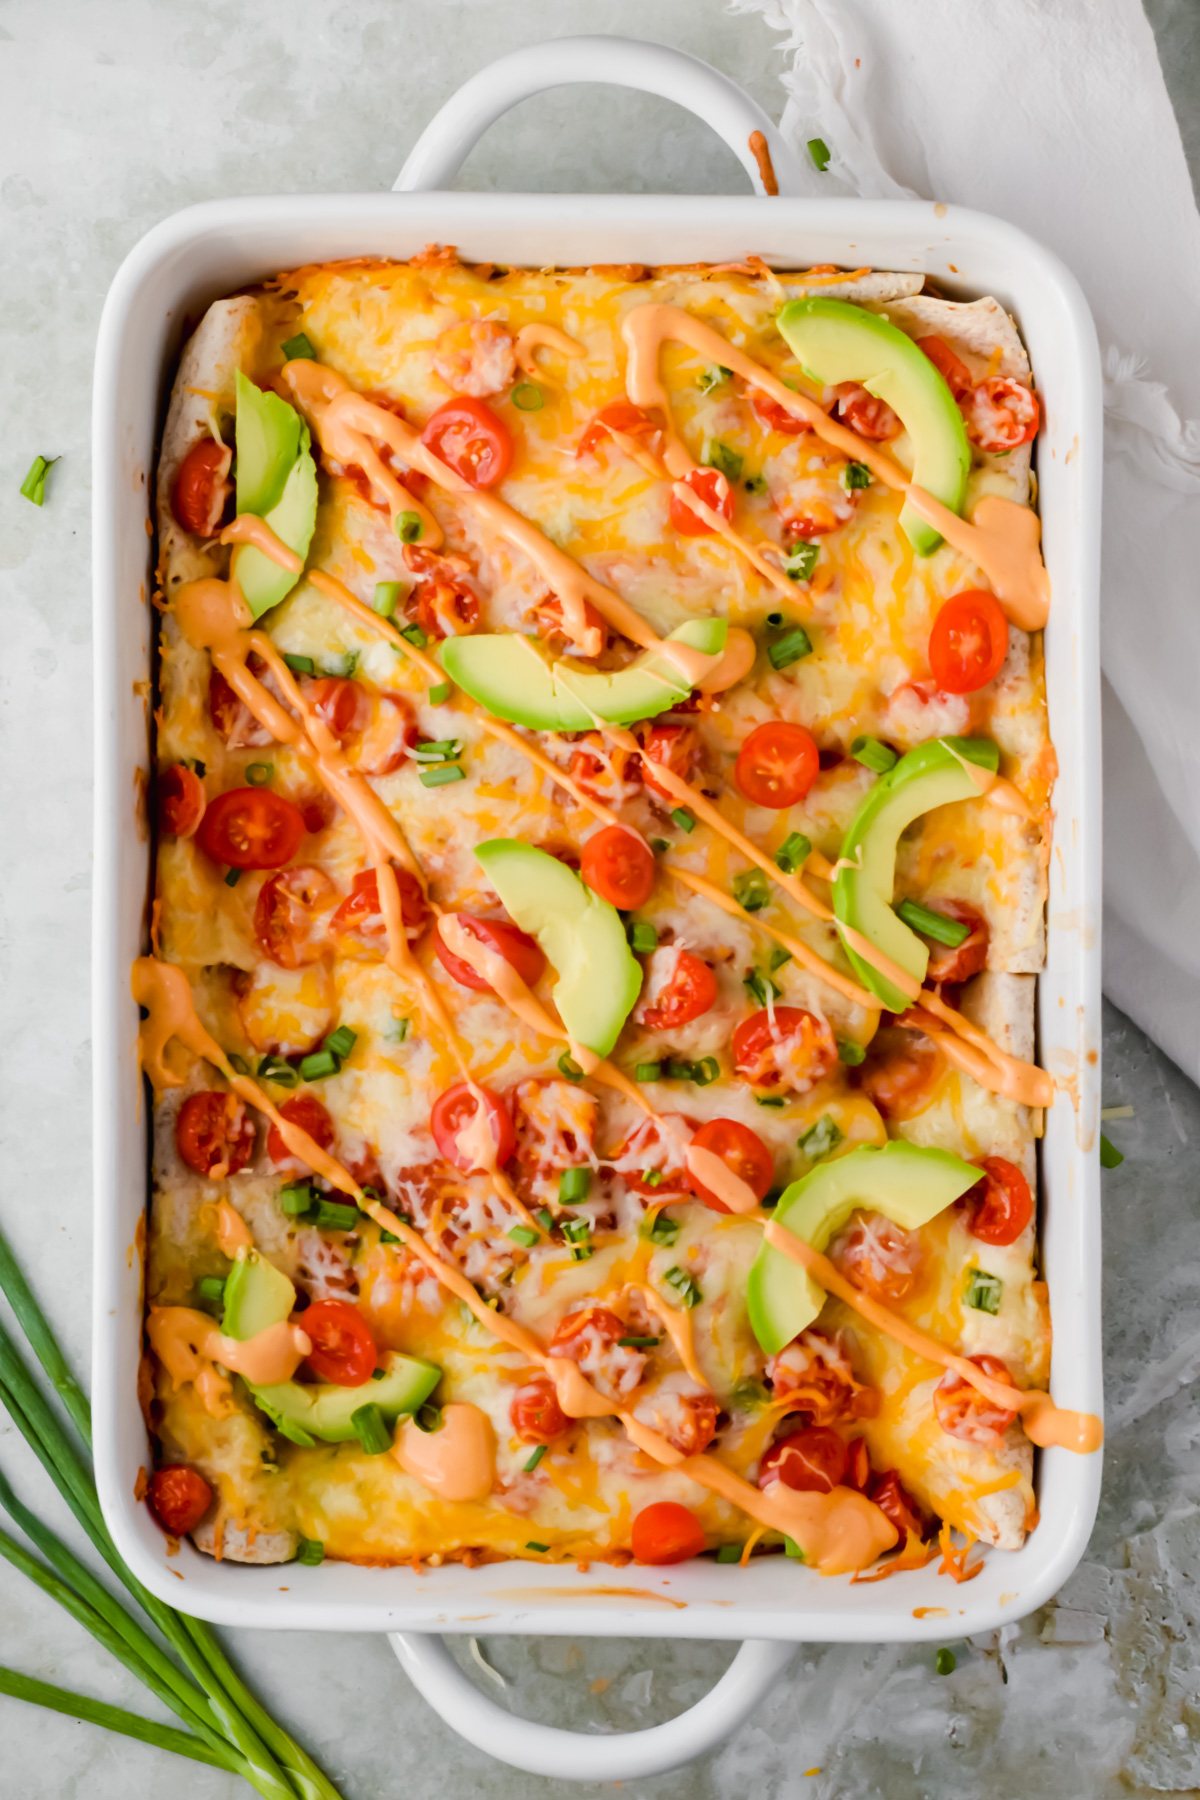 baked healthy ground turkey enchiladas garnished with cherry tomato slices, avocado slices, green onion and queso in white baking pan.